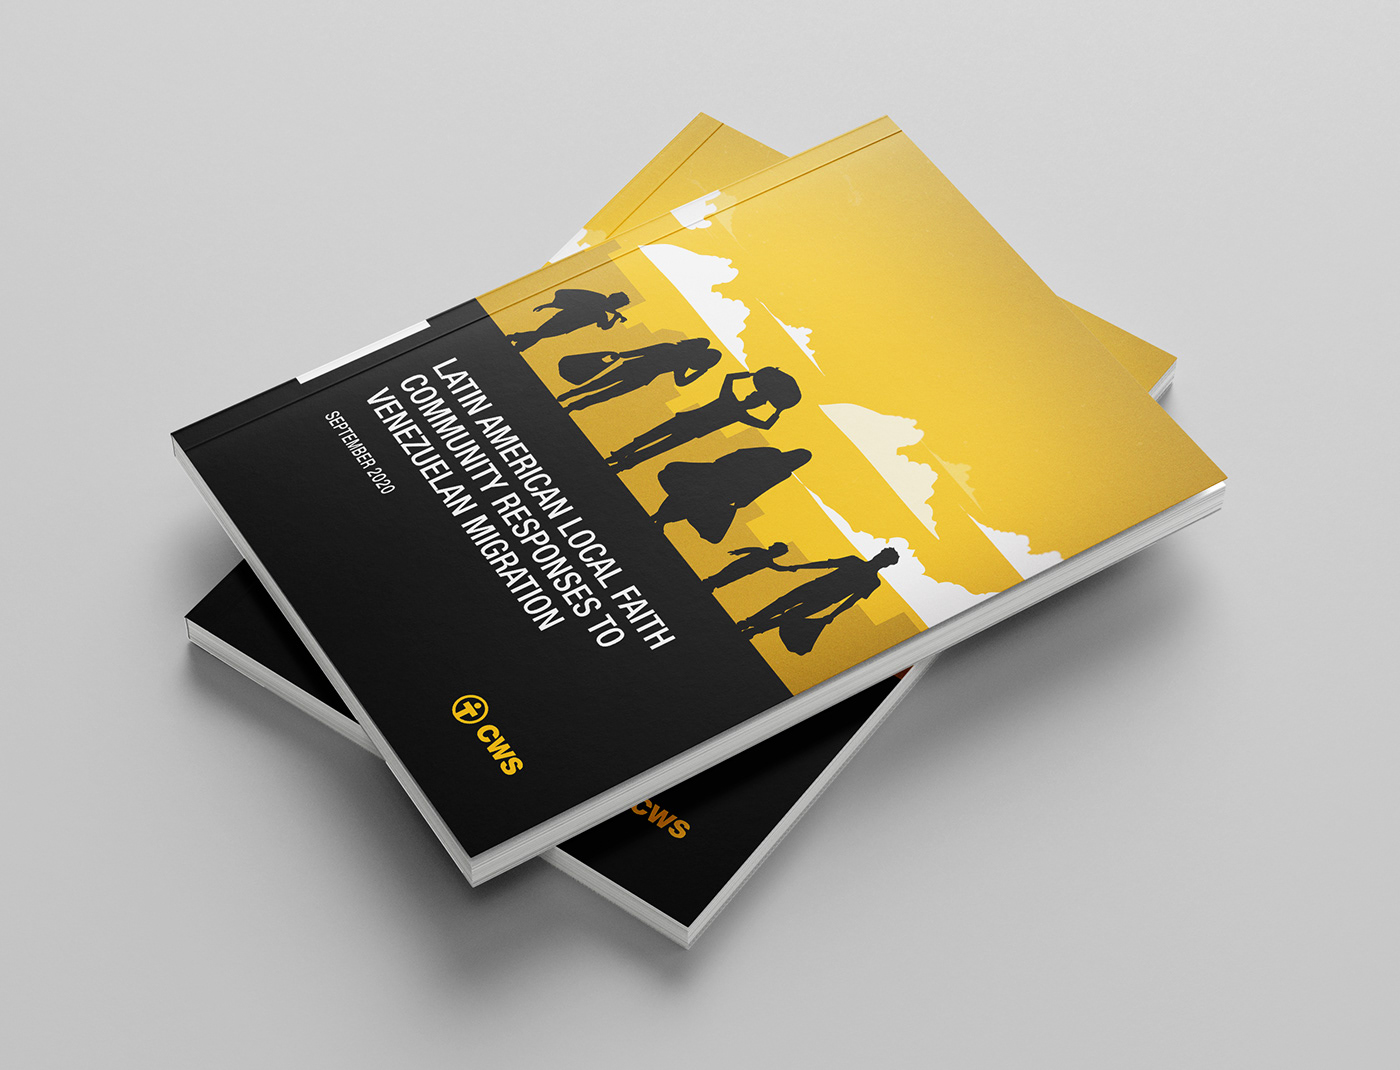 book cover design ebook graphic hardcover pages pdf print report